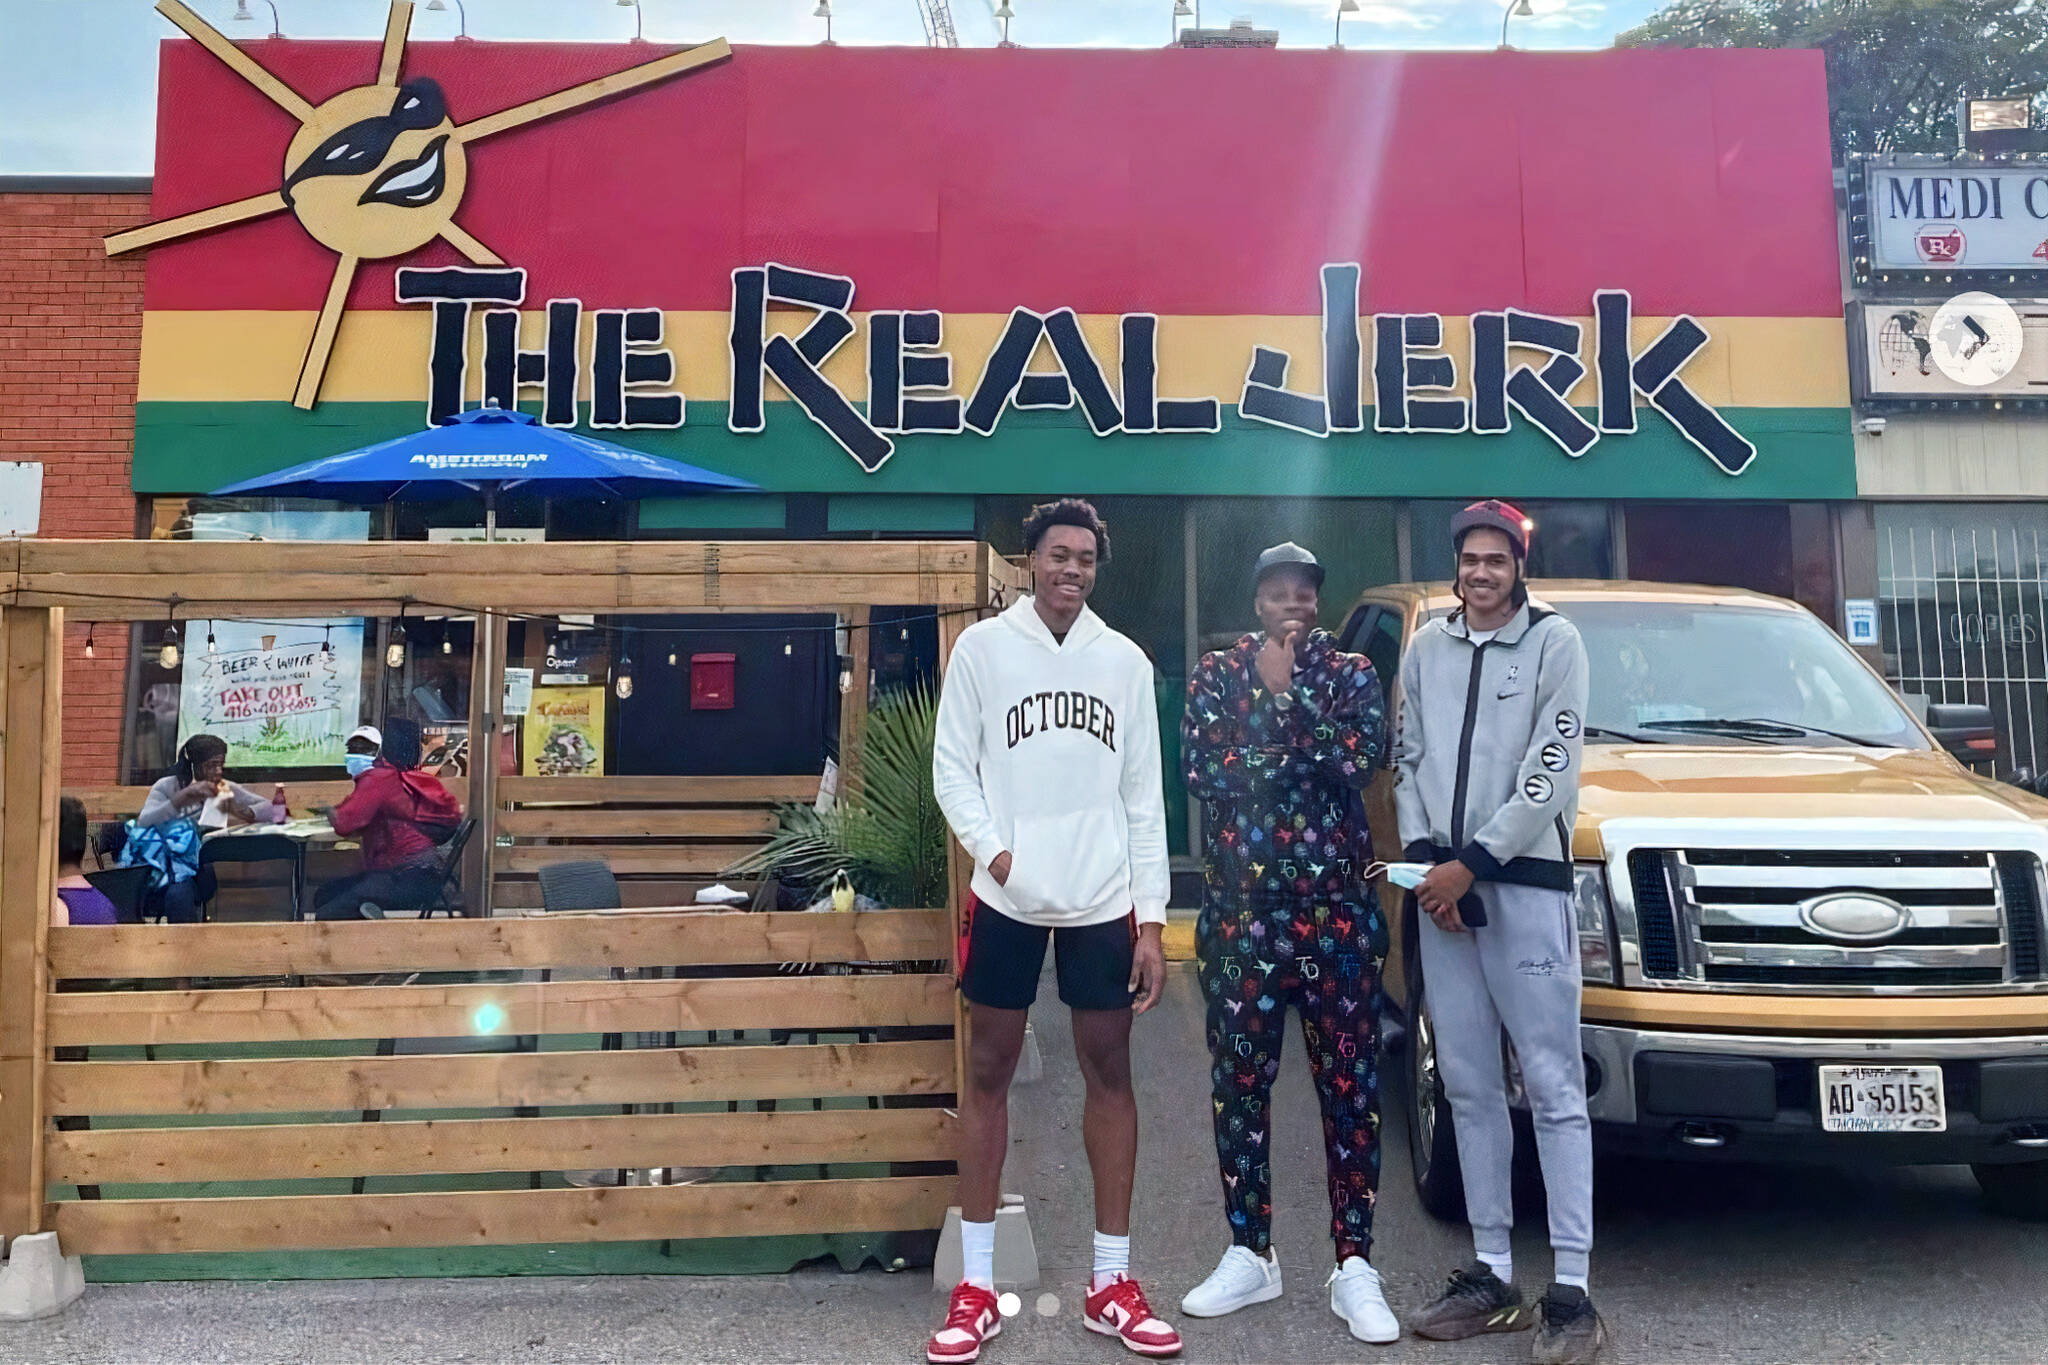 Torontos Newest Raptors Spotted At Real Jerk Over Holiday Long Weekend